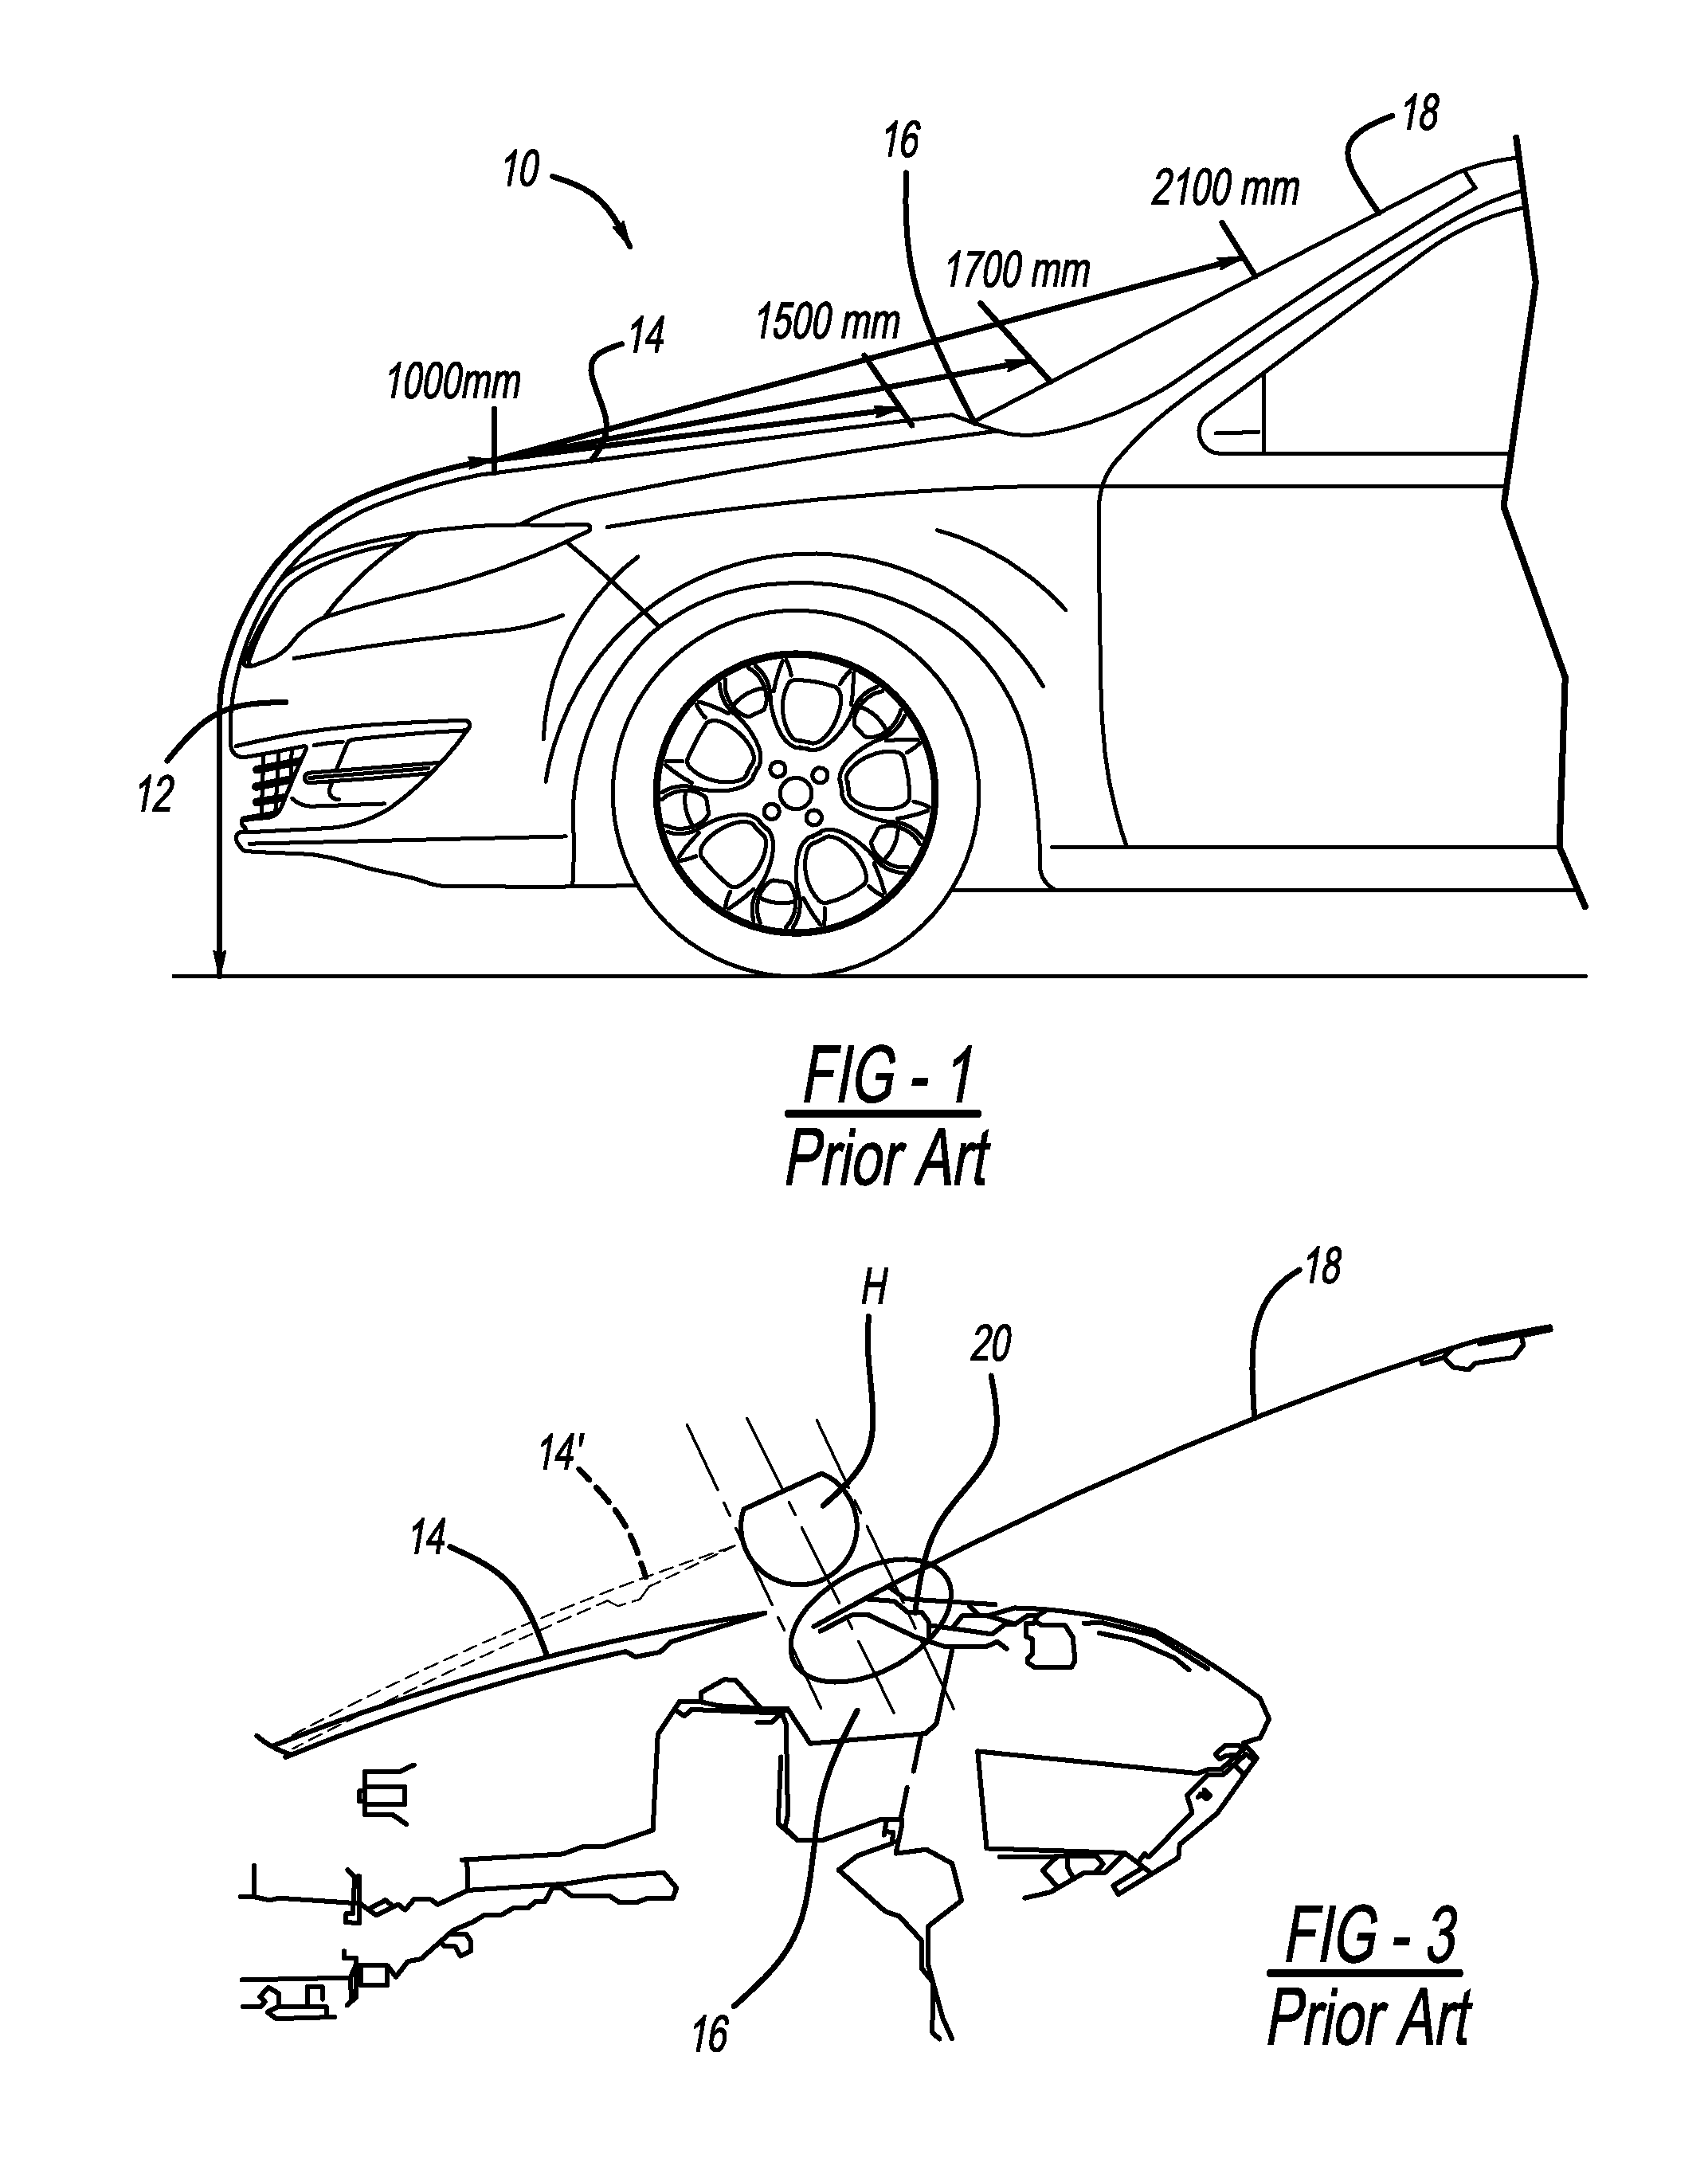 Deployable vehicle hood extender for pedestrian protection